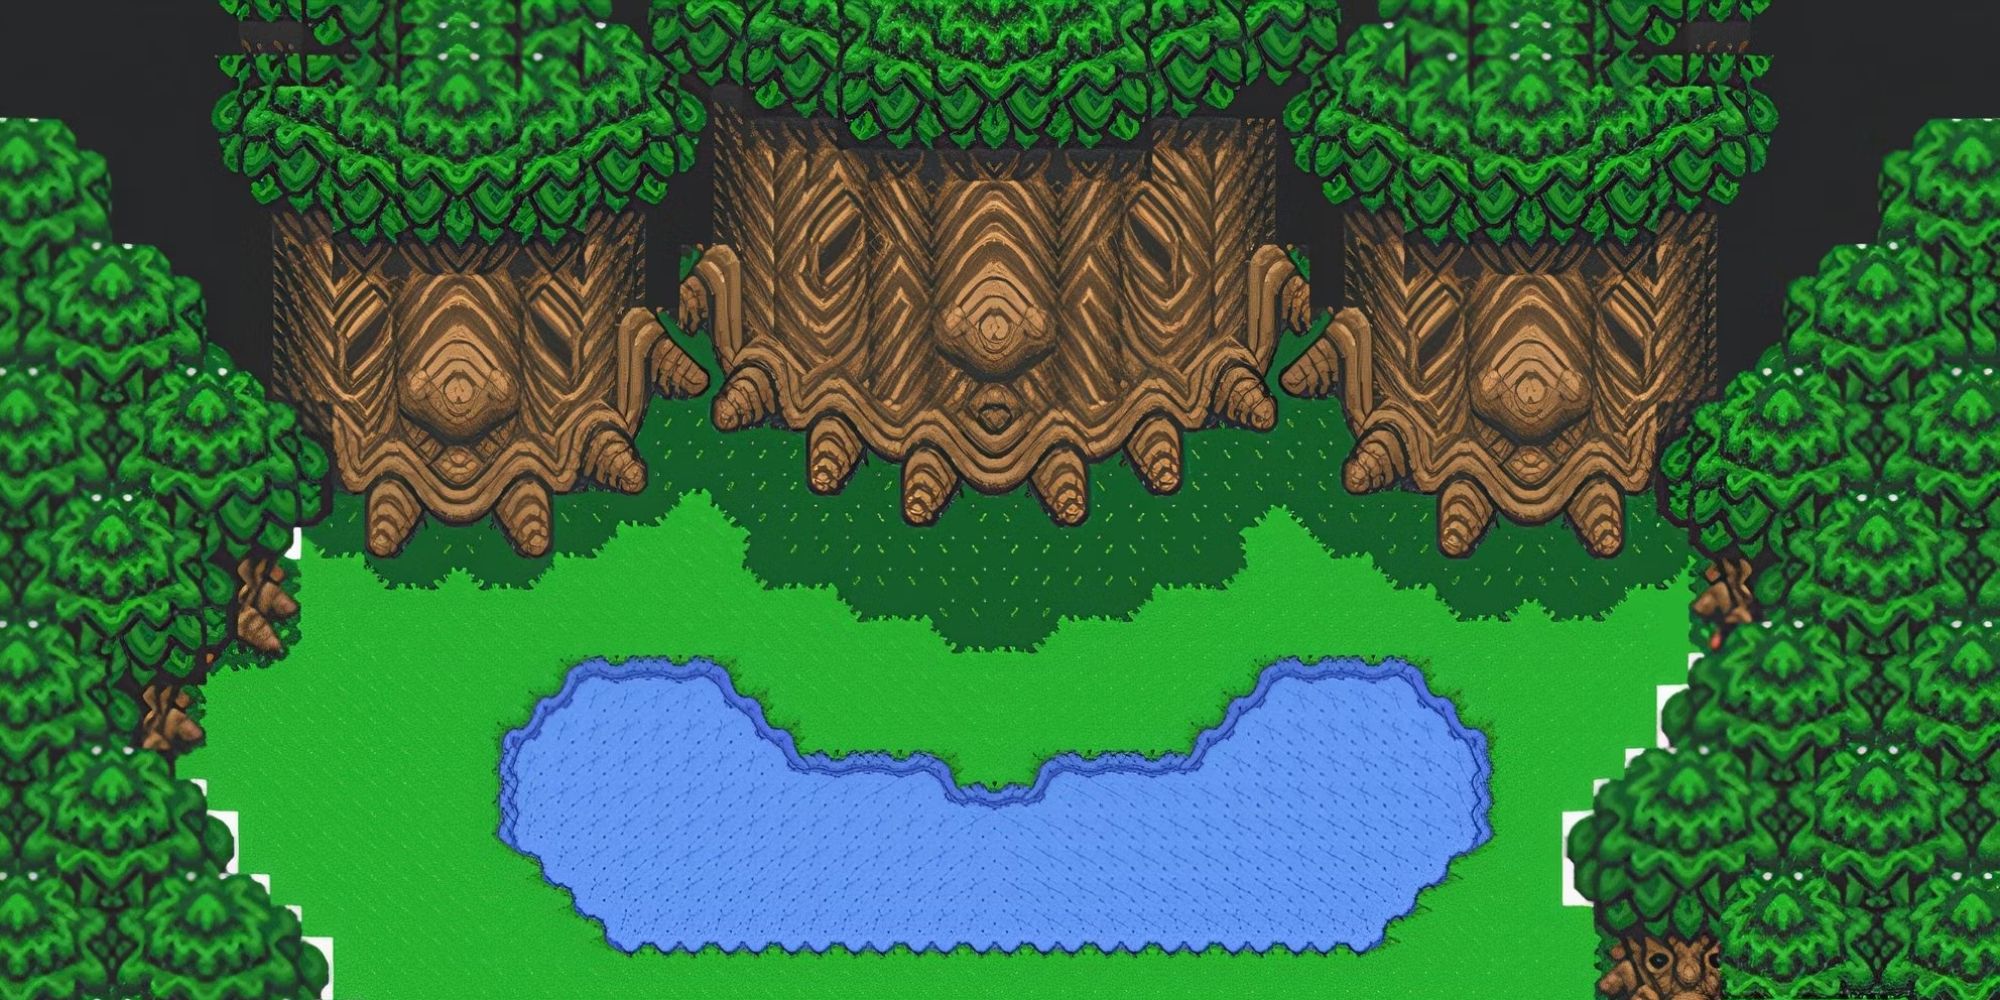 Early concept of the Deku Tree in The Legend of Zelda A Link to the Past